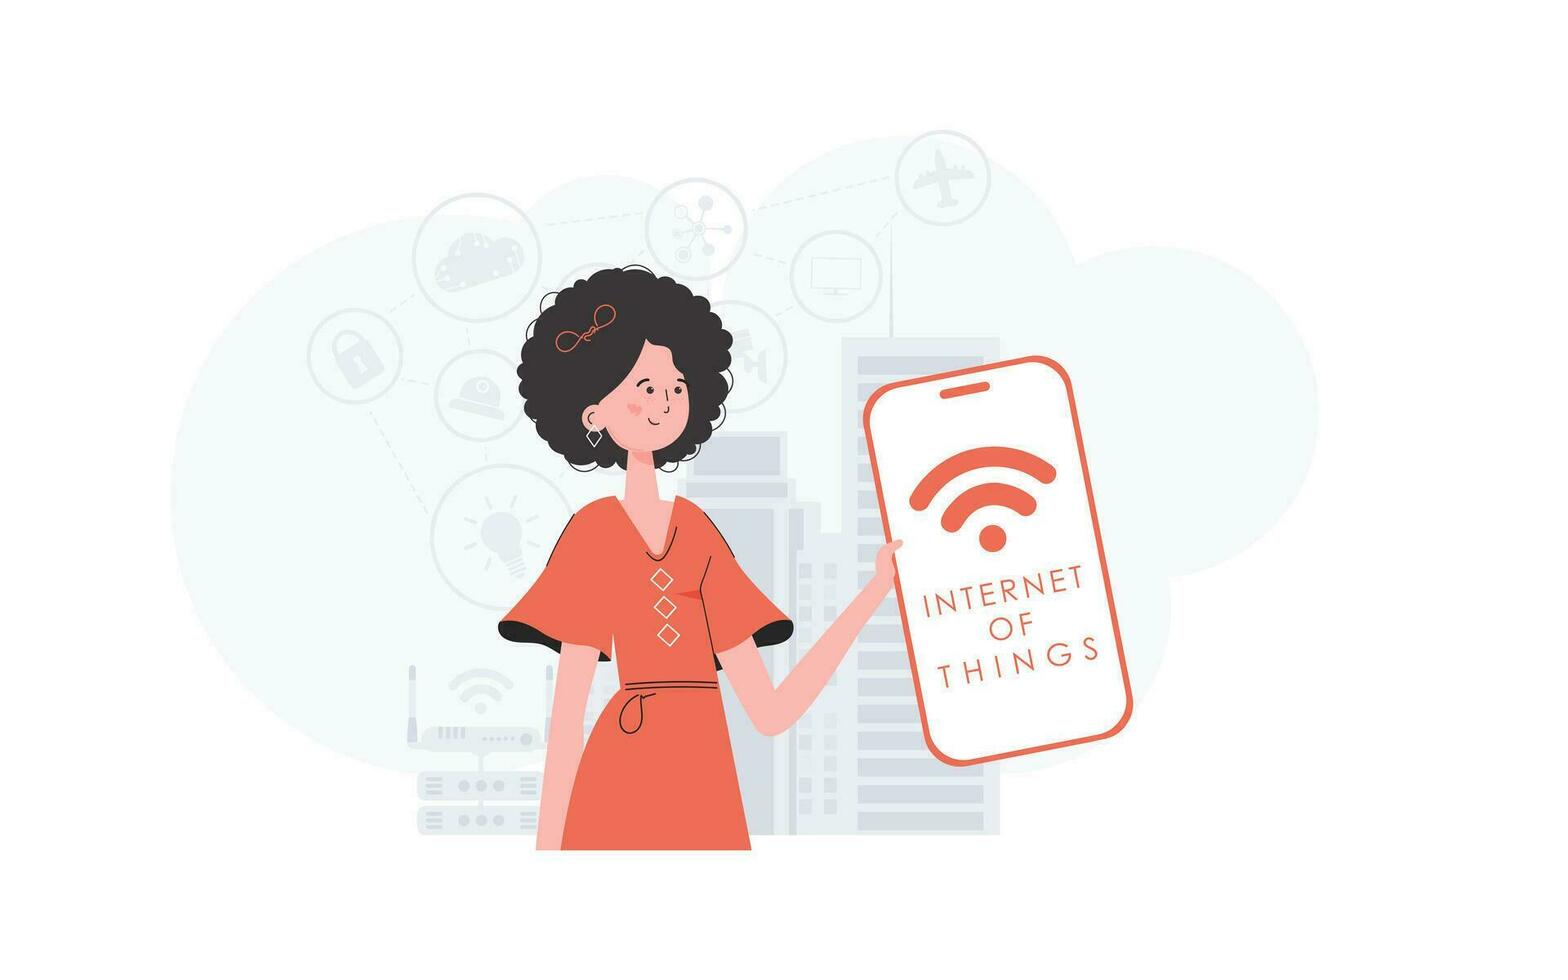 IoT concept. The girl is holding a phone with the IoT logo in her hands. Trendy flat style. Vector illustration.